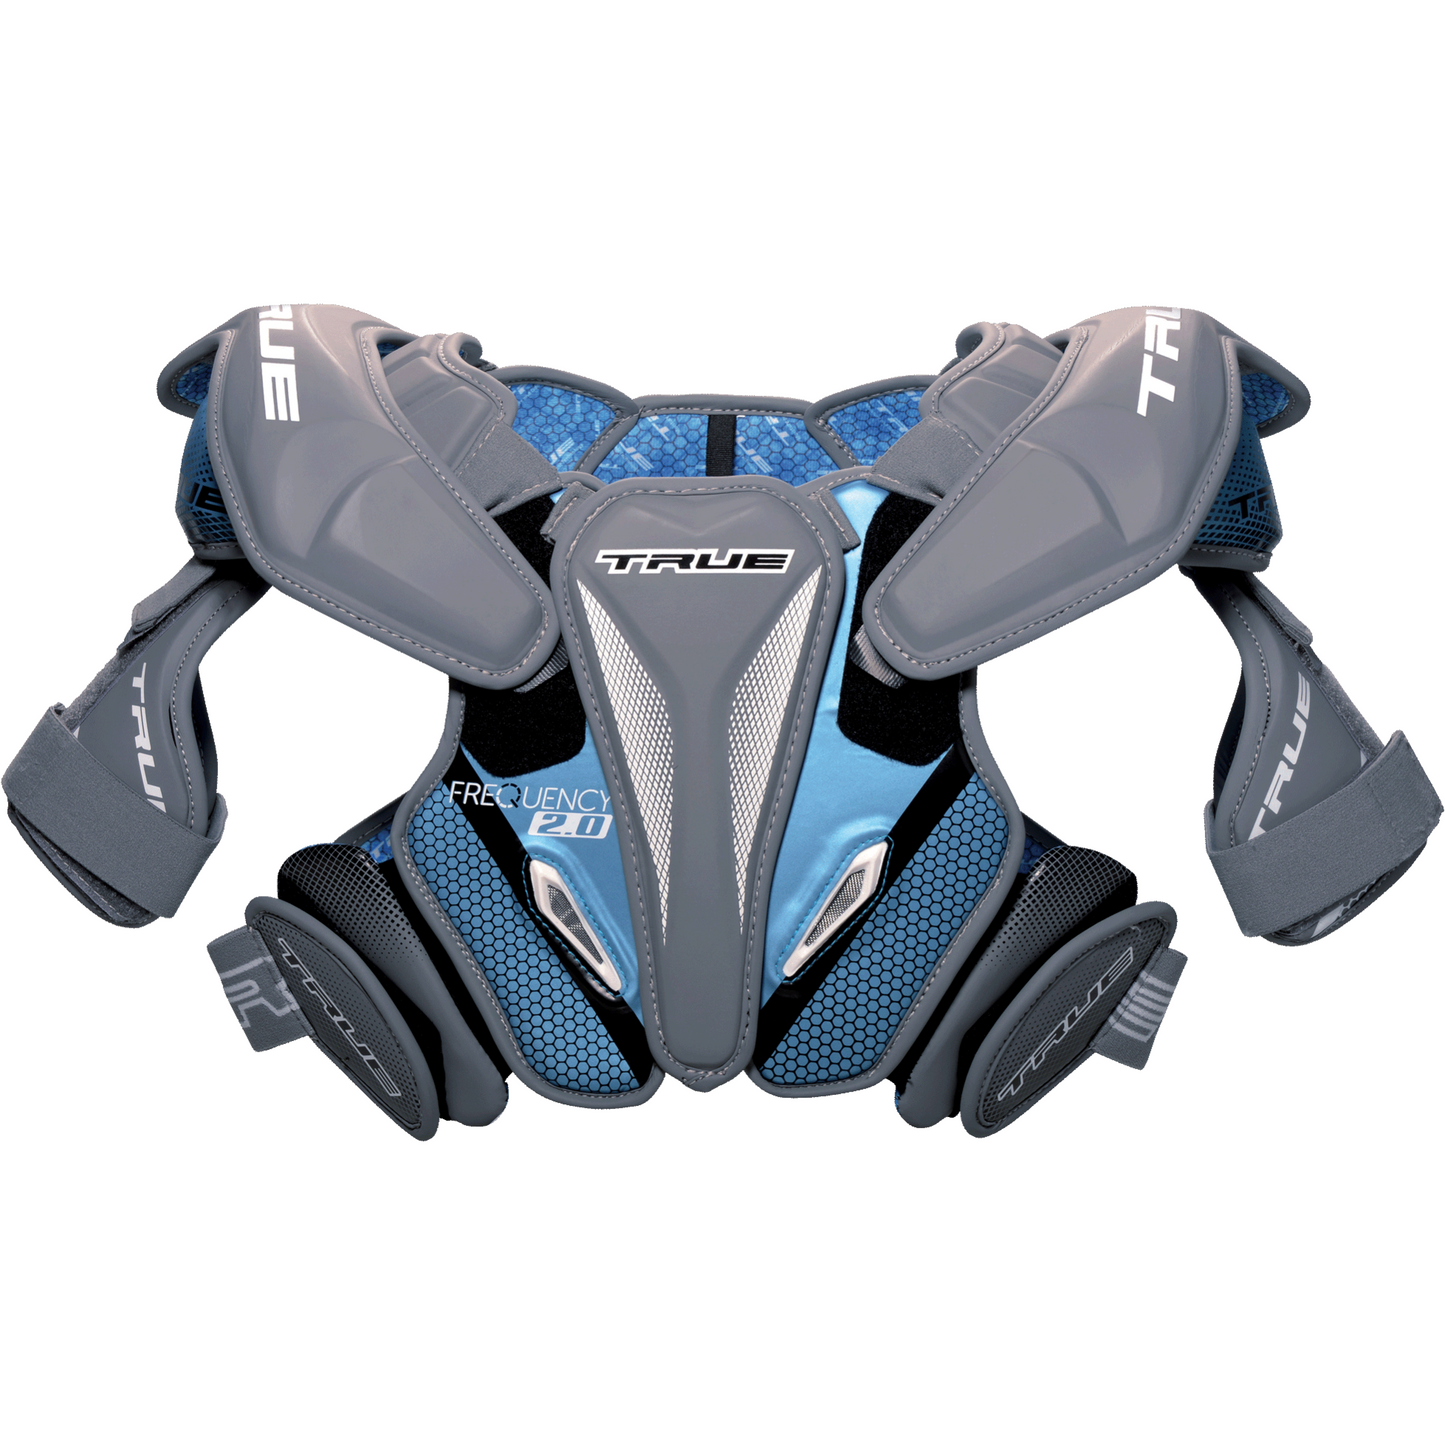 TRUE Frequency 2.0 Shoulder Pad